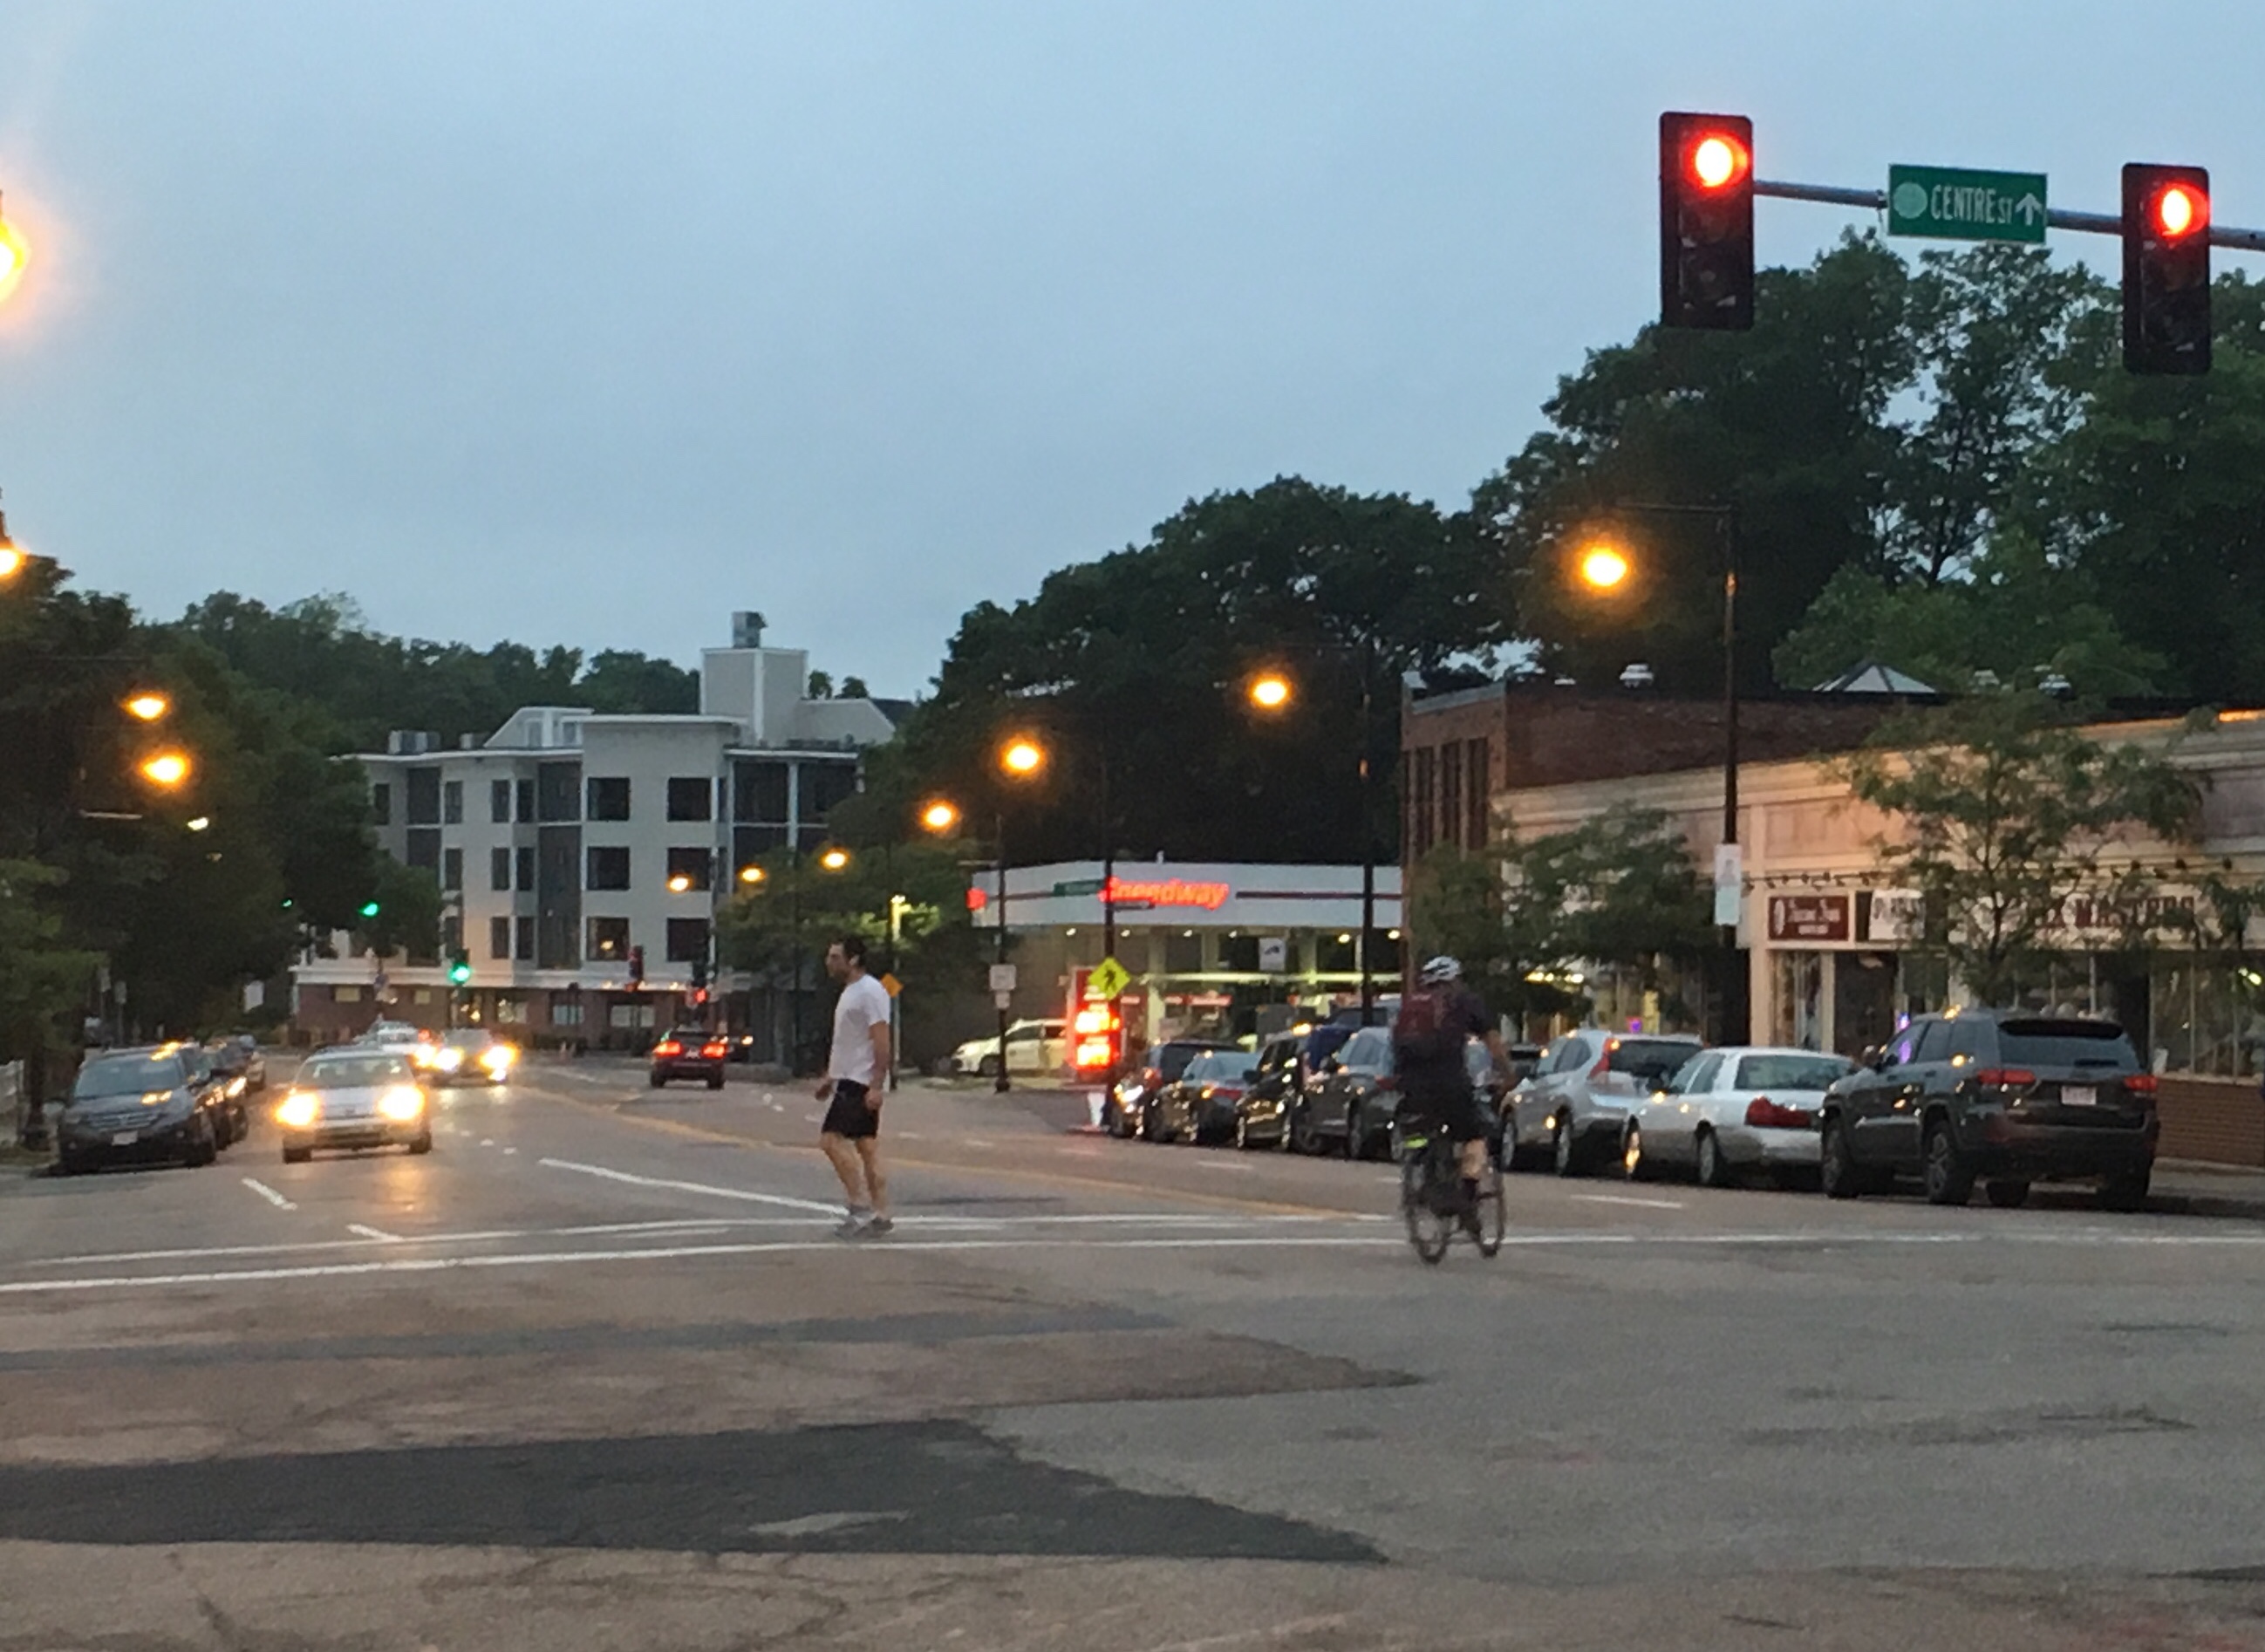 An evening scene on a wide four-lane street that's lined with one-story commercial buildings. In the foreground, a person walks across the street at a traffic light as another person rides a bike in the opposite direction. A few cars' headlights are visible in the background.